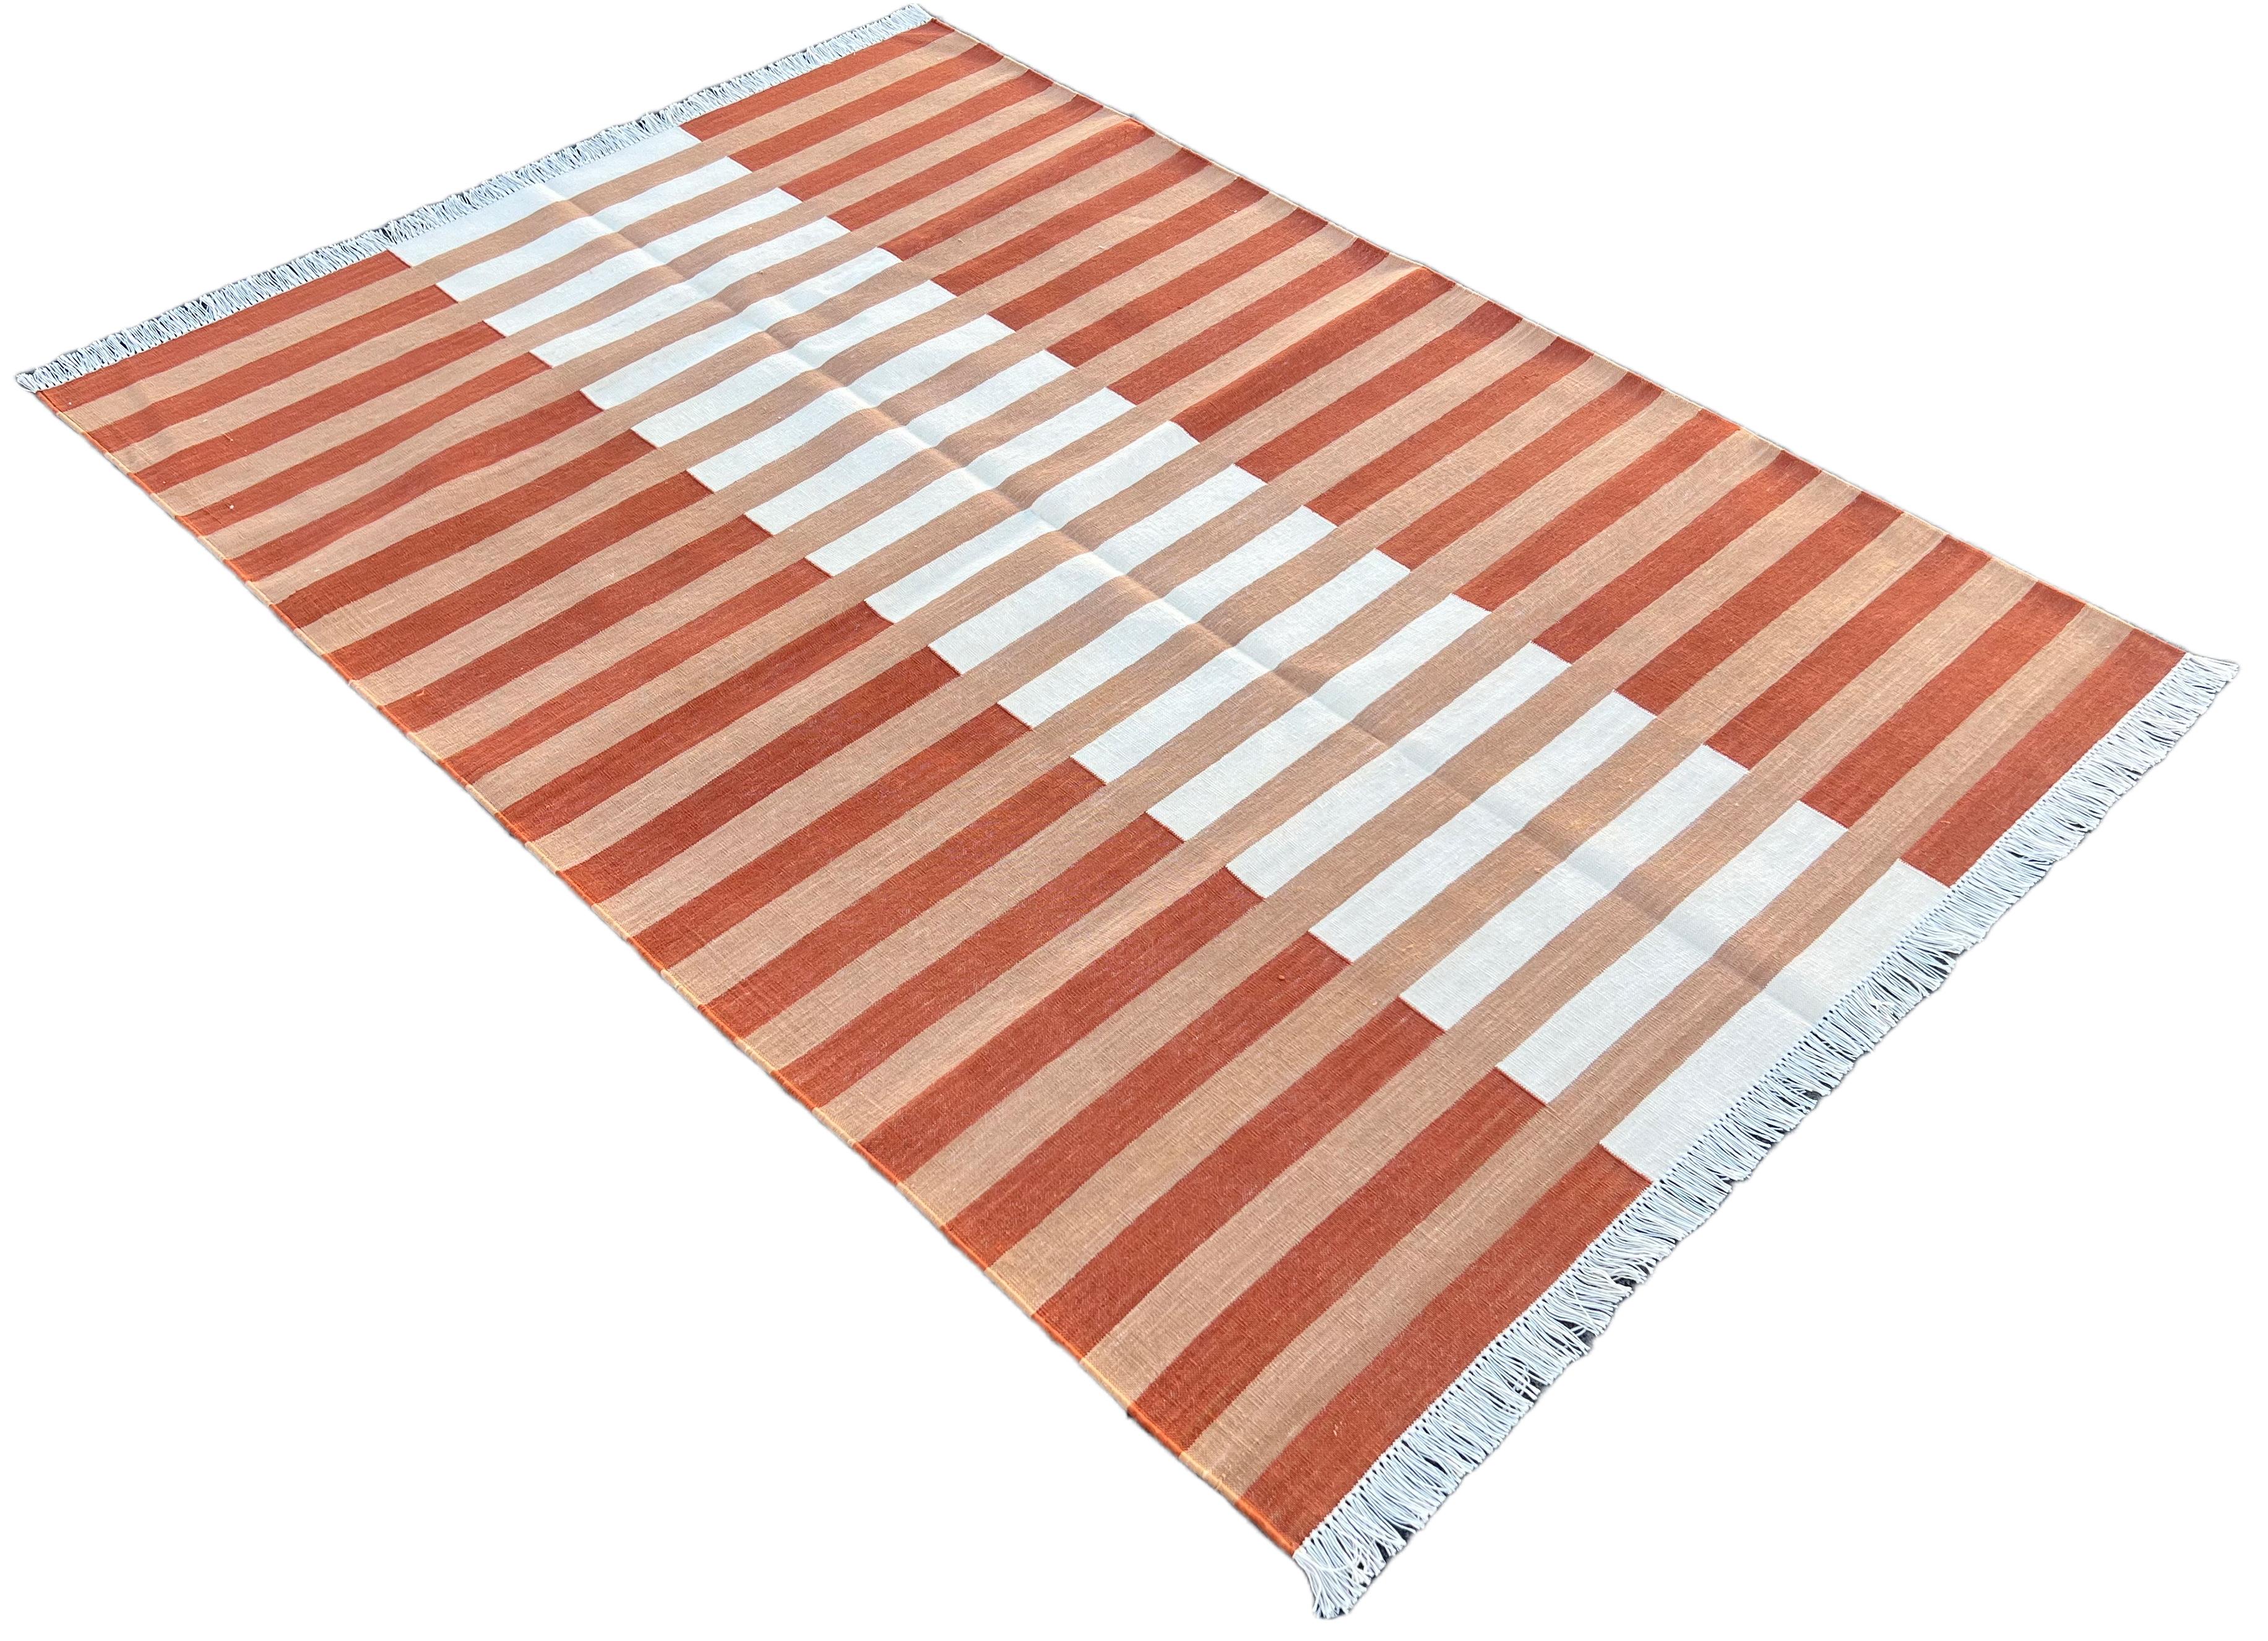 Cotton Vegetable Dyed Tan And White Striped Indian Dhurrie Rug-4'x6' 

These special flat-weave dhurries are hand-woven with 15 ply 100% cotton yarn. Due to the special manufacturing techniques used to create our rugs, the size and color of each